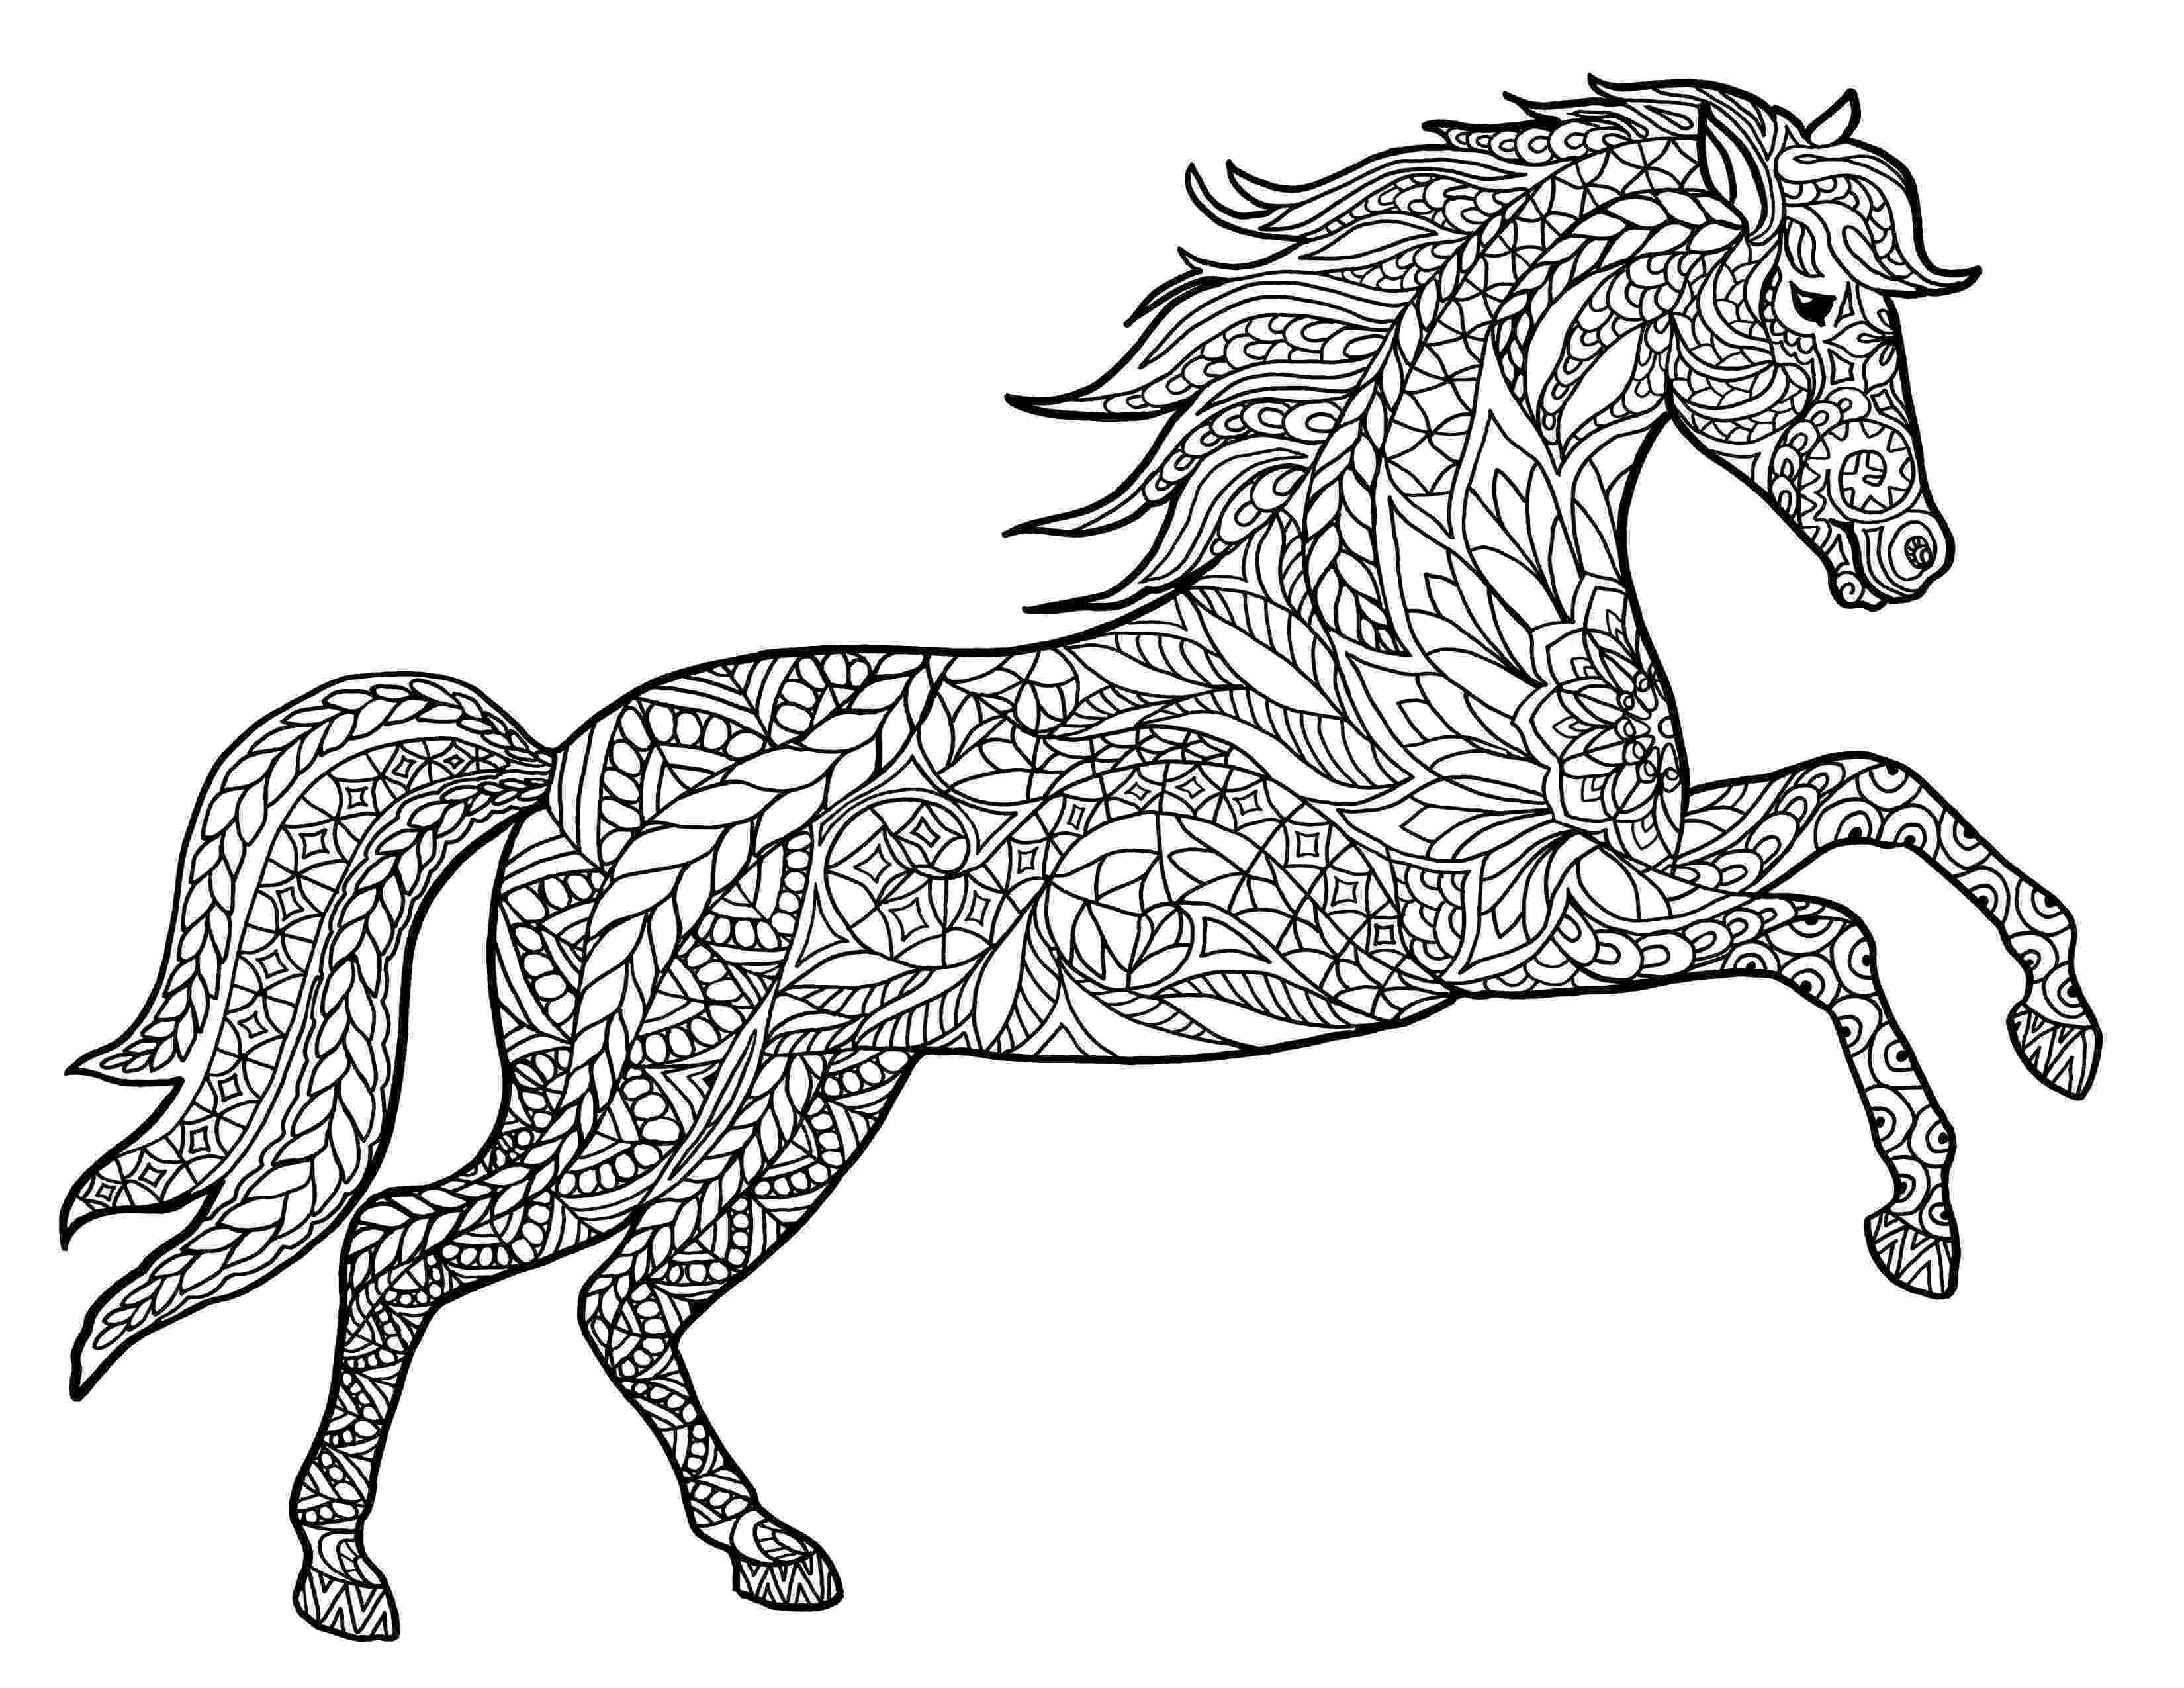 cheetah coloring pages for adults animal coloring pages for adults best coloring pages for for pages coloring adults cheetah 